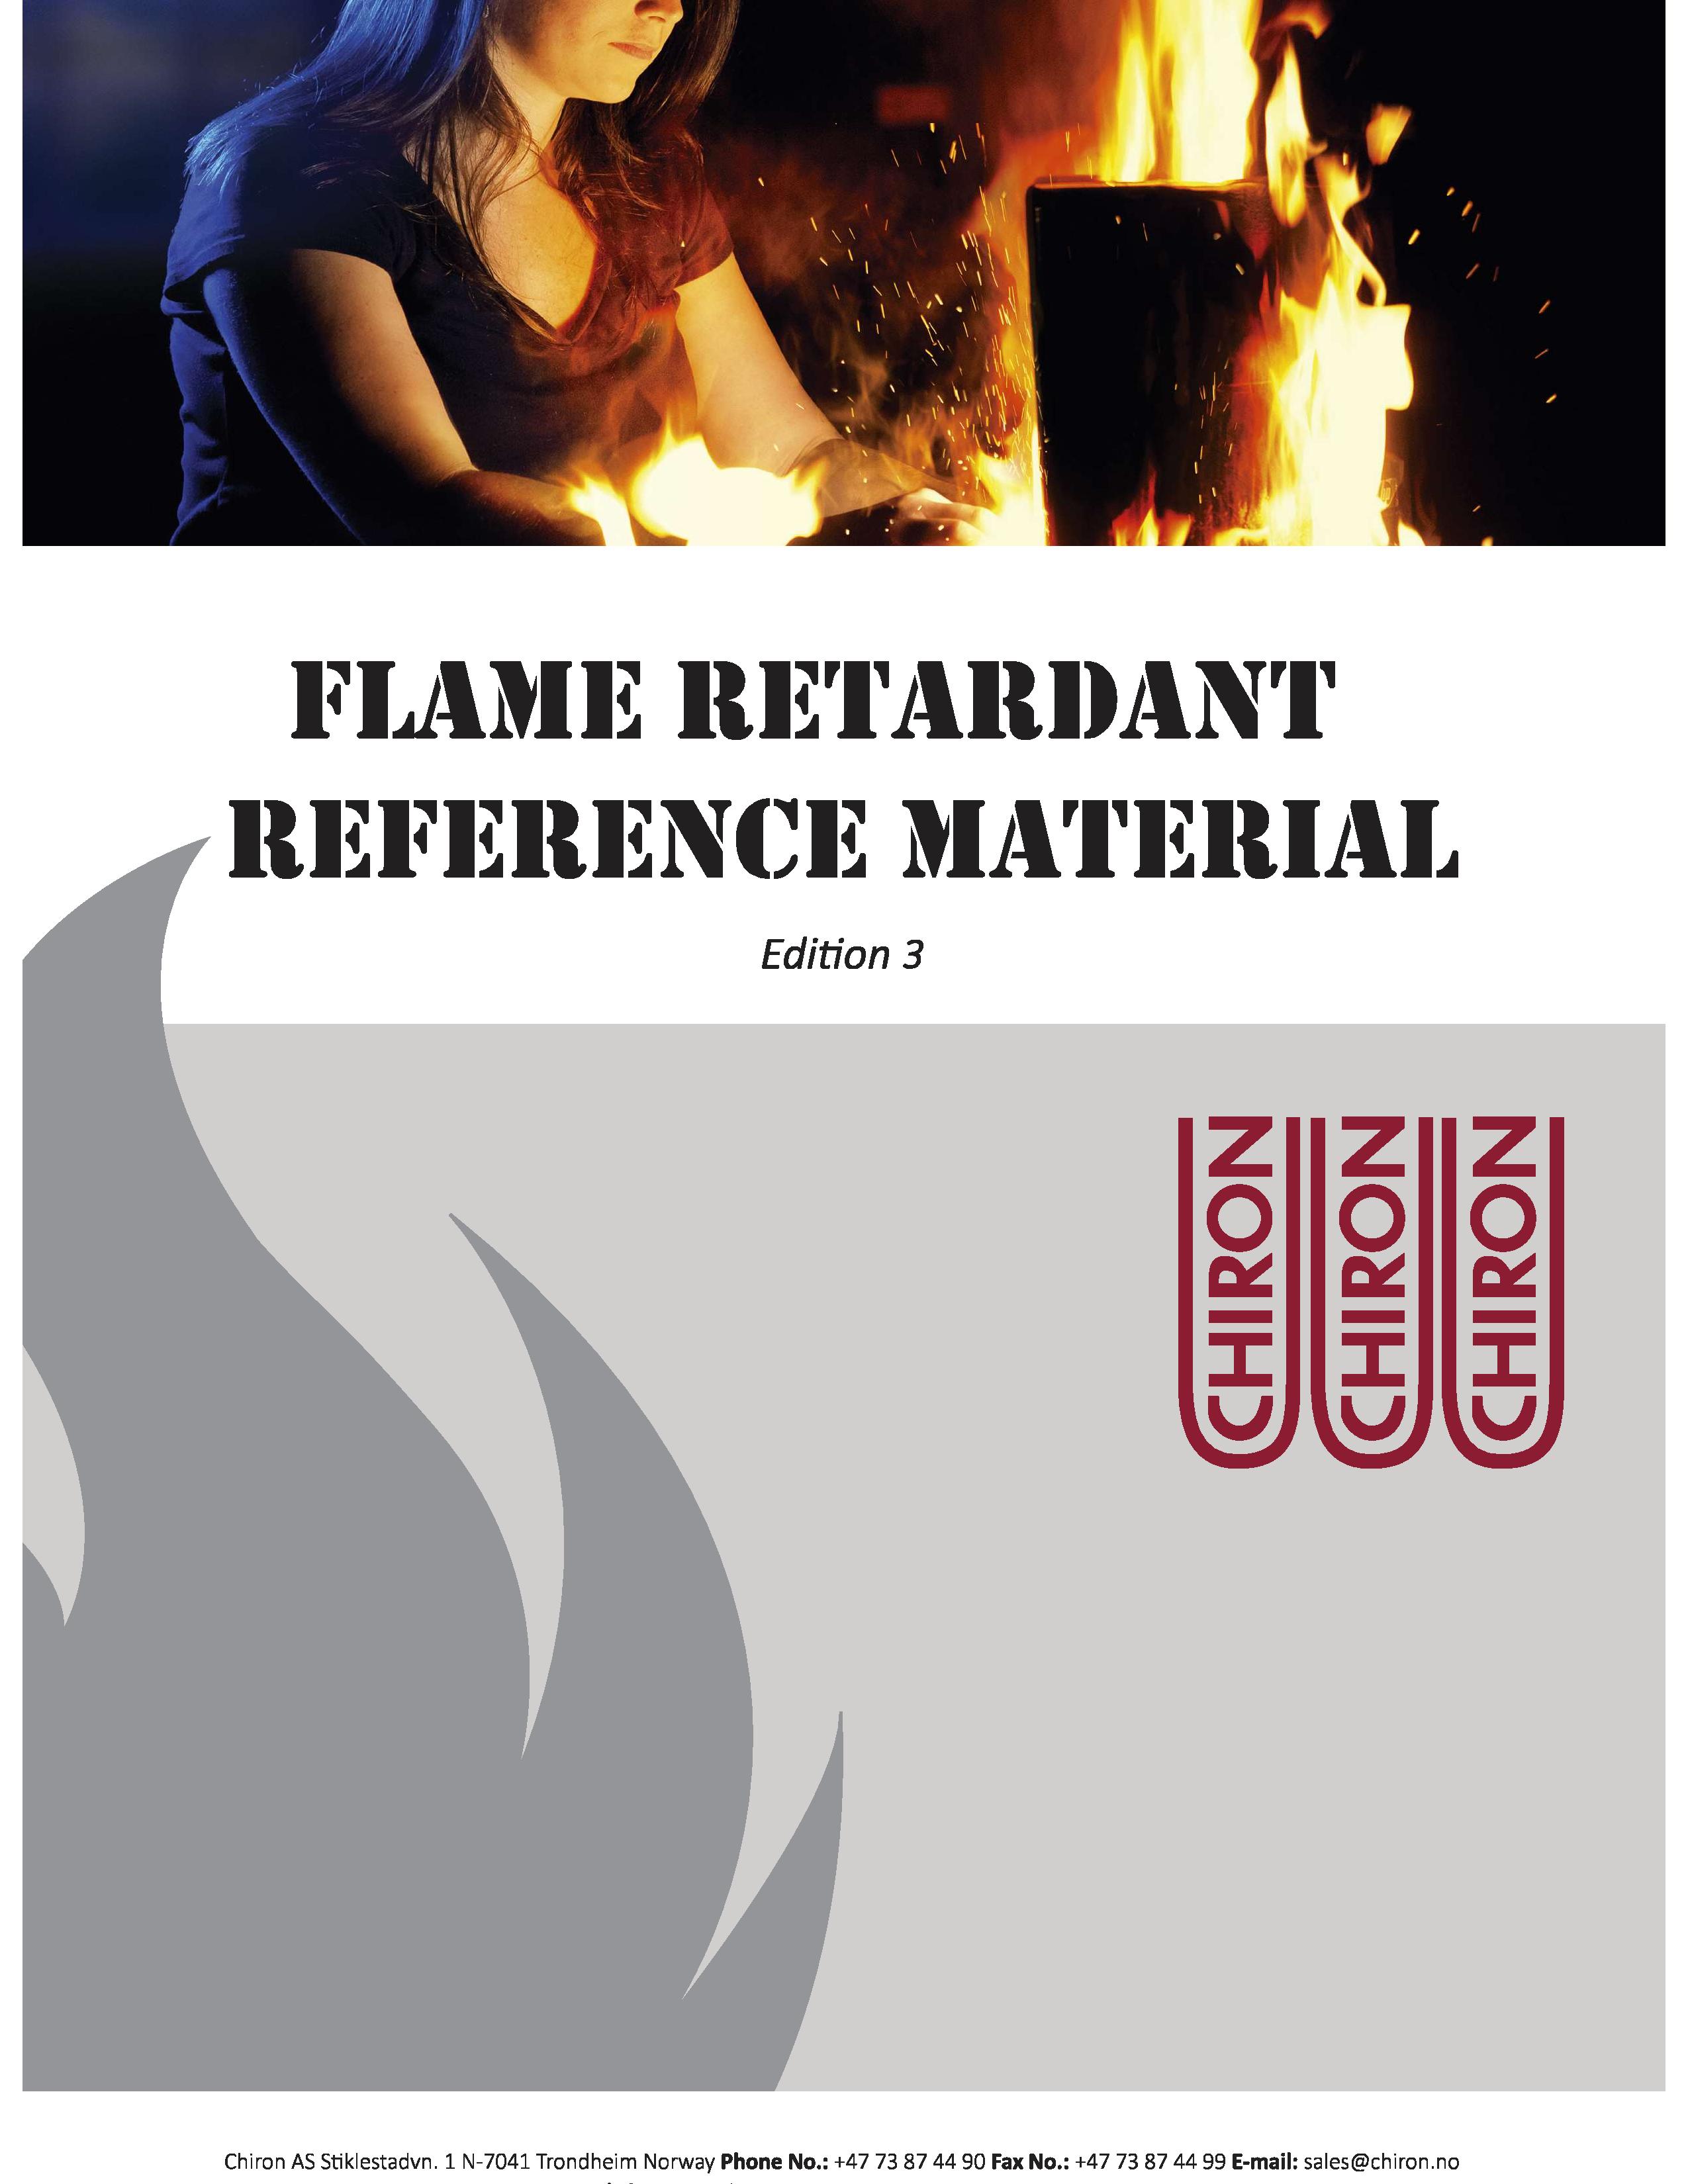 Flame Retardant Reference Materials, Edition 3